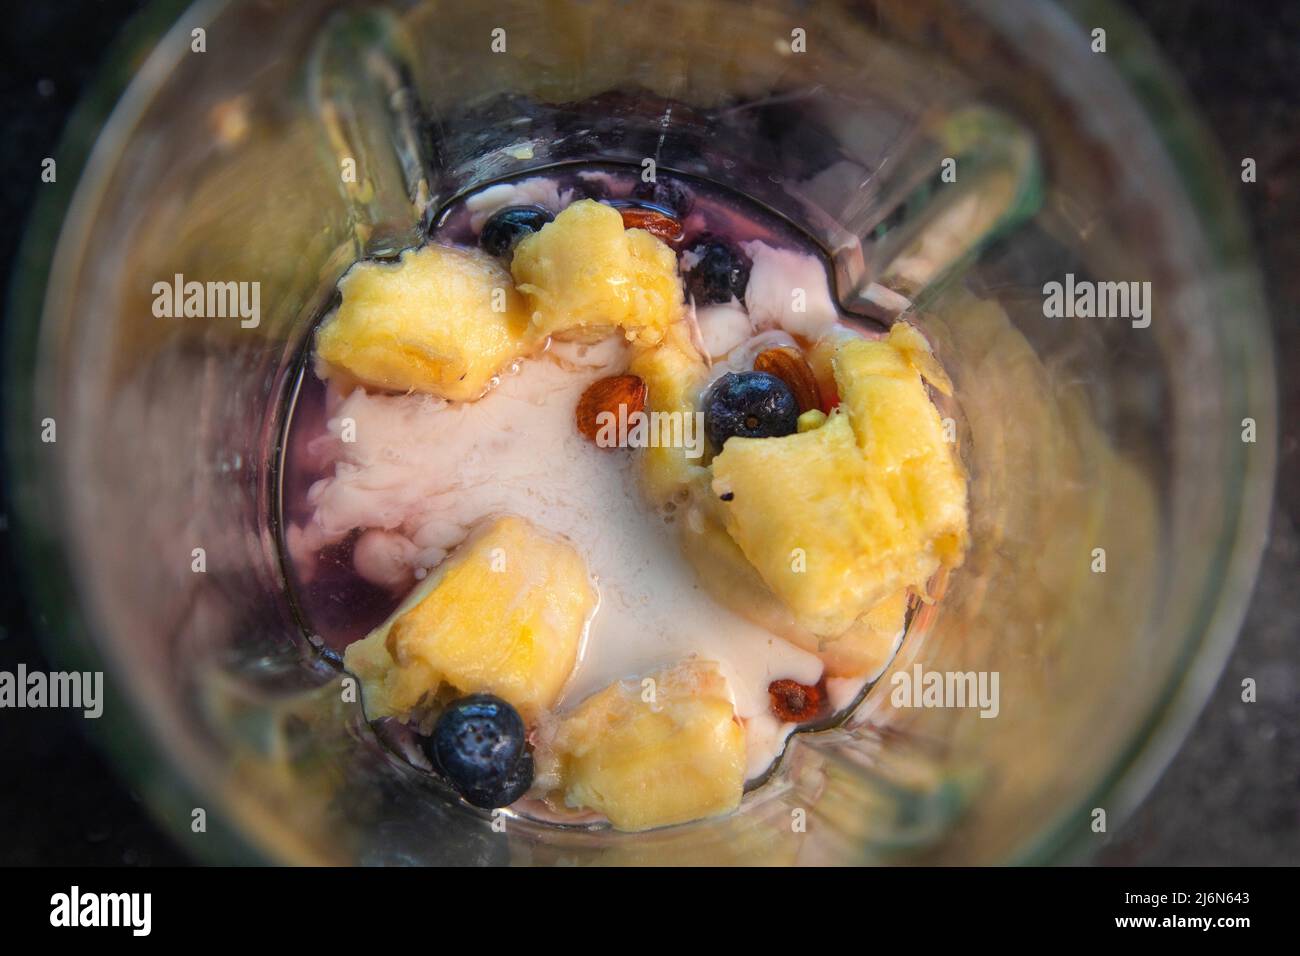 Top view of fruit smoothie in blender. Stock Photo